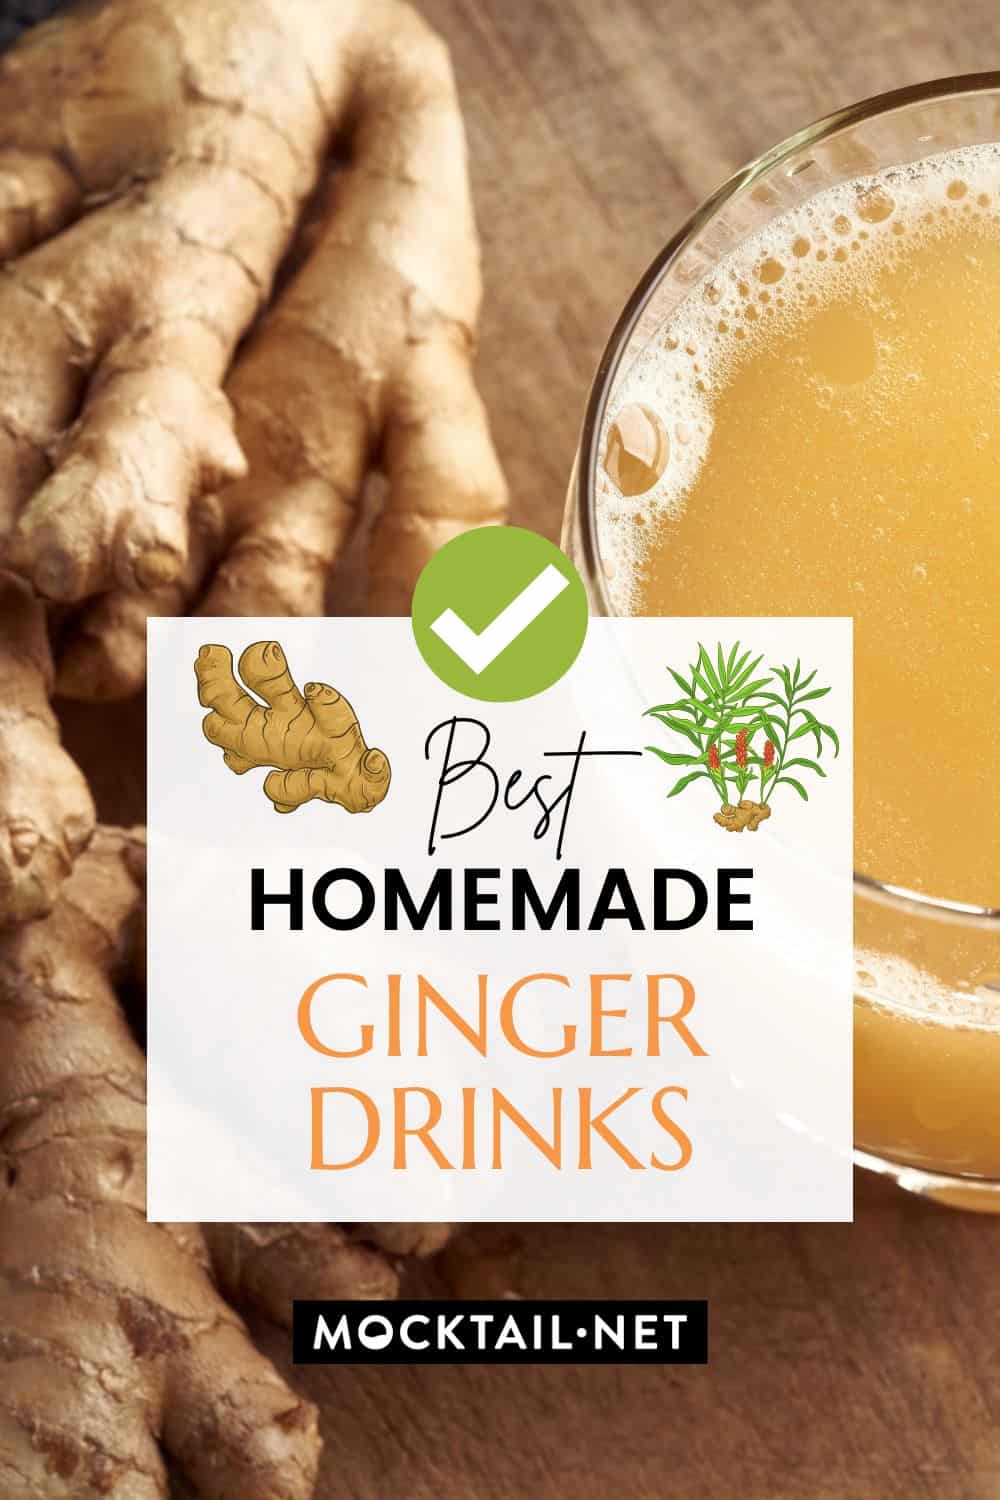 Best Ginger Drinks without Alcohol